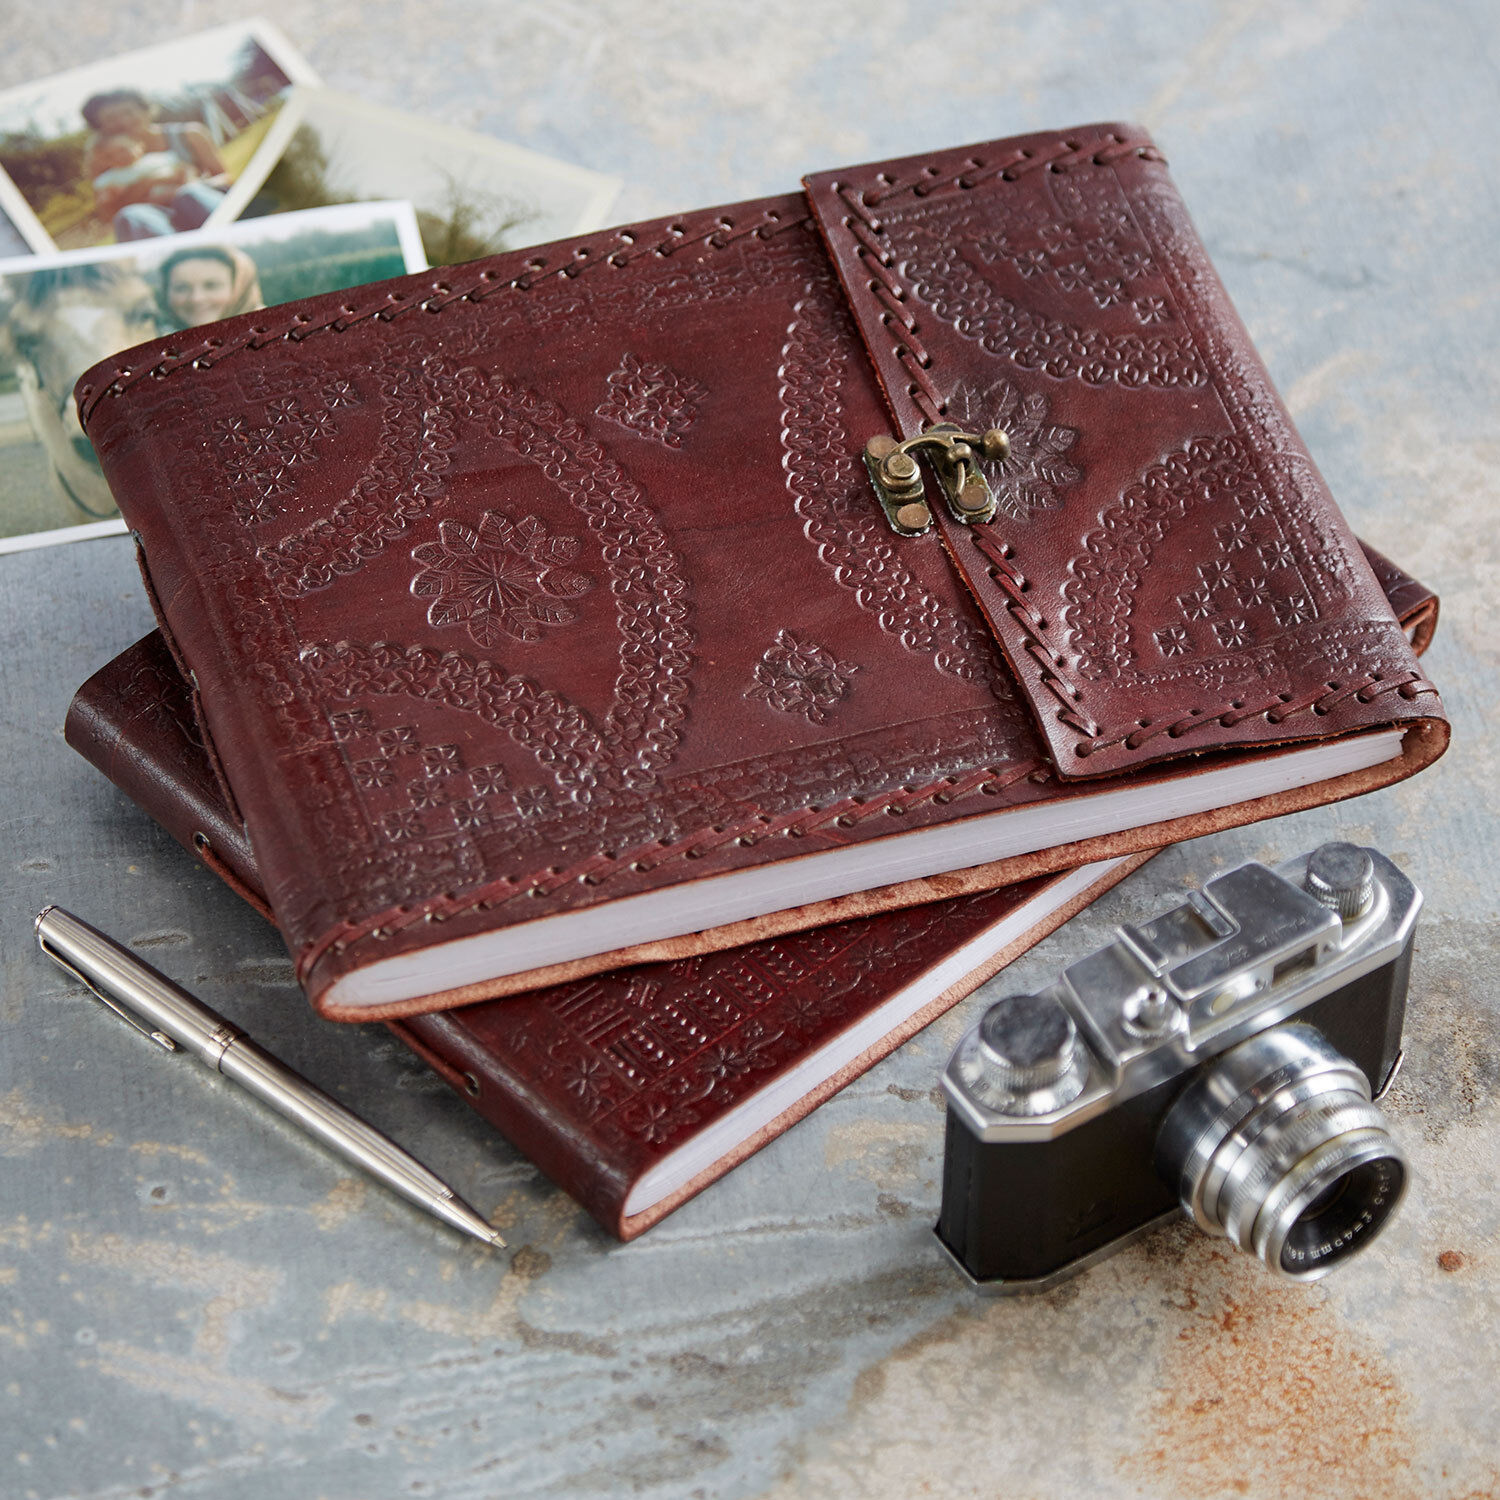 Indra Fairtrade Med Embossed Stitched Leather Photo Album Scrapbook 2nd Quality